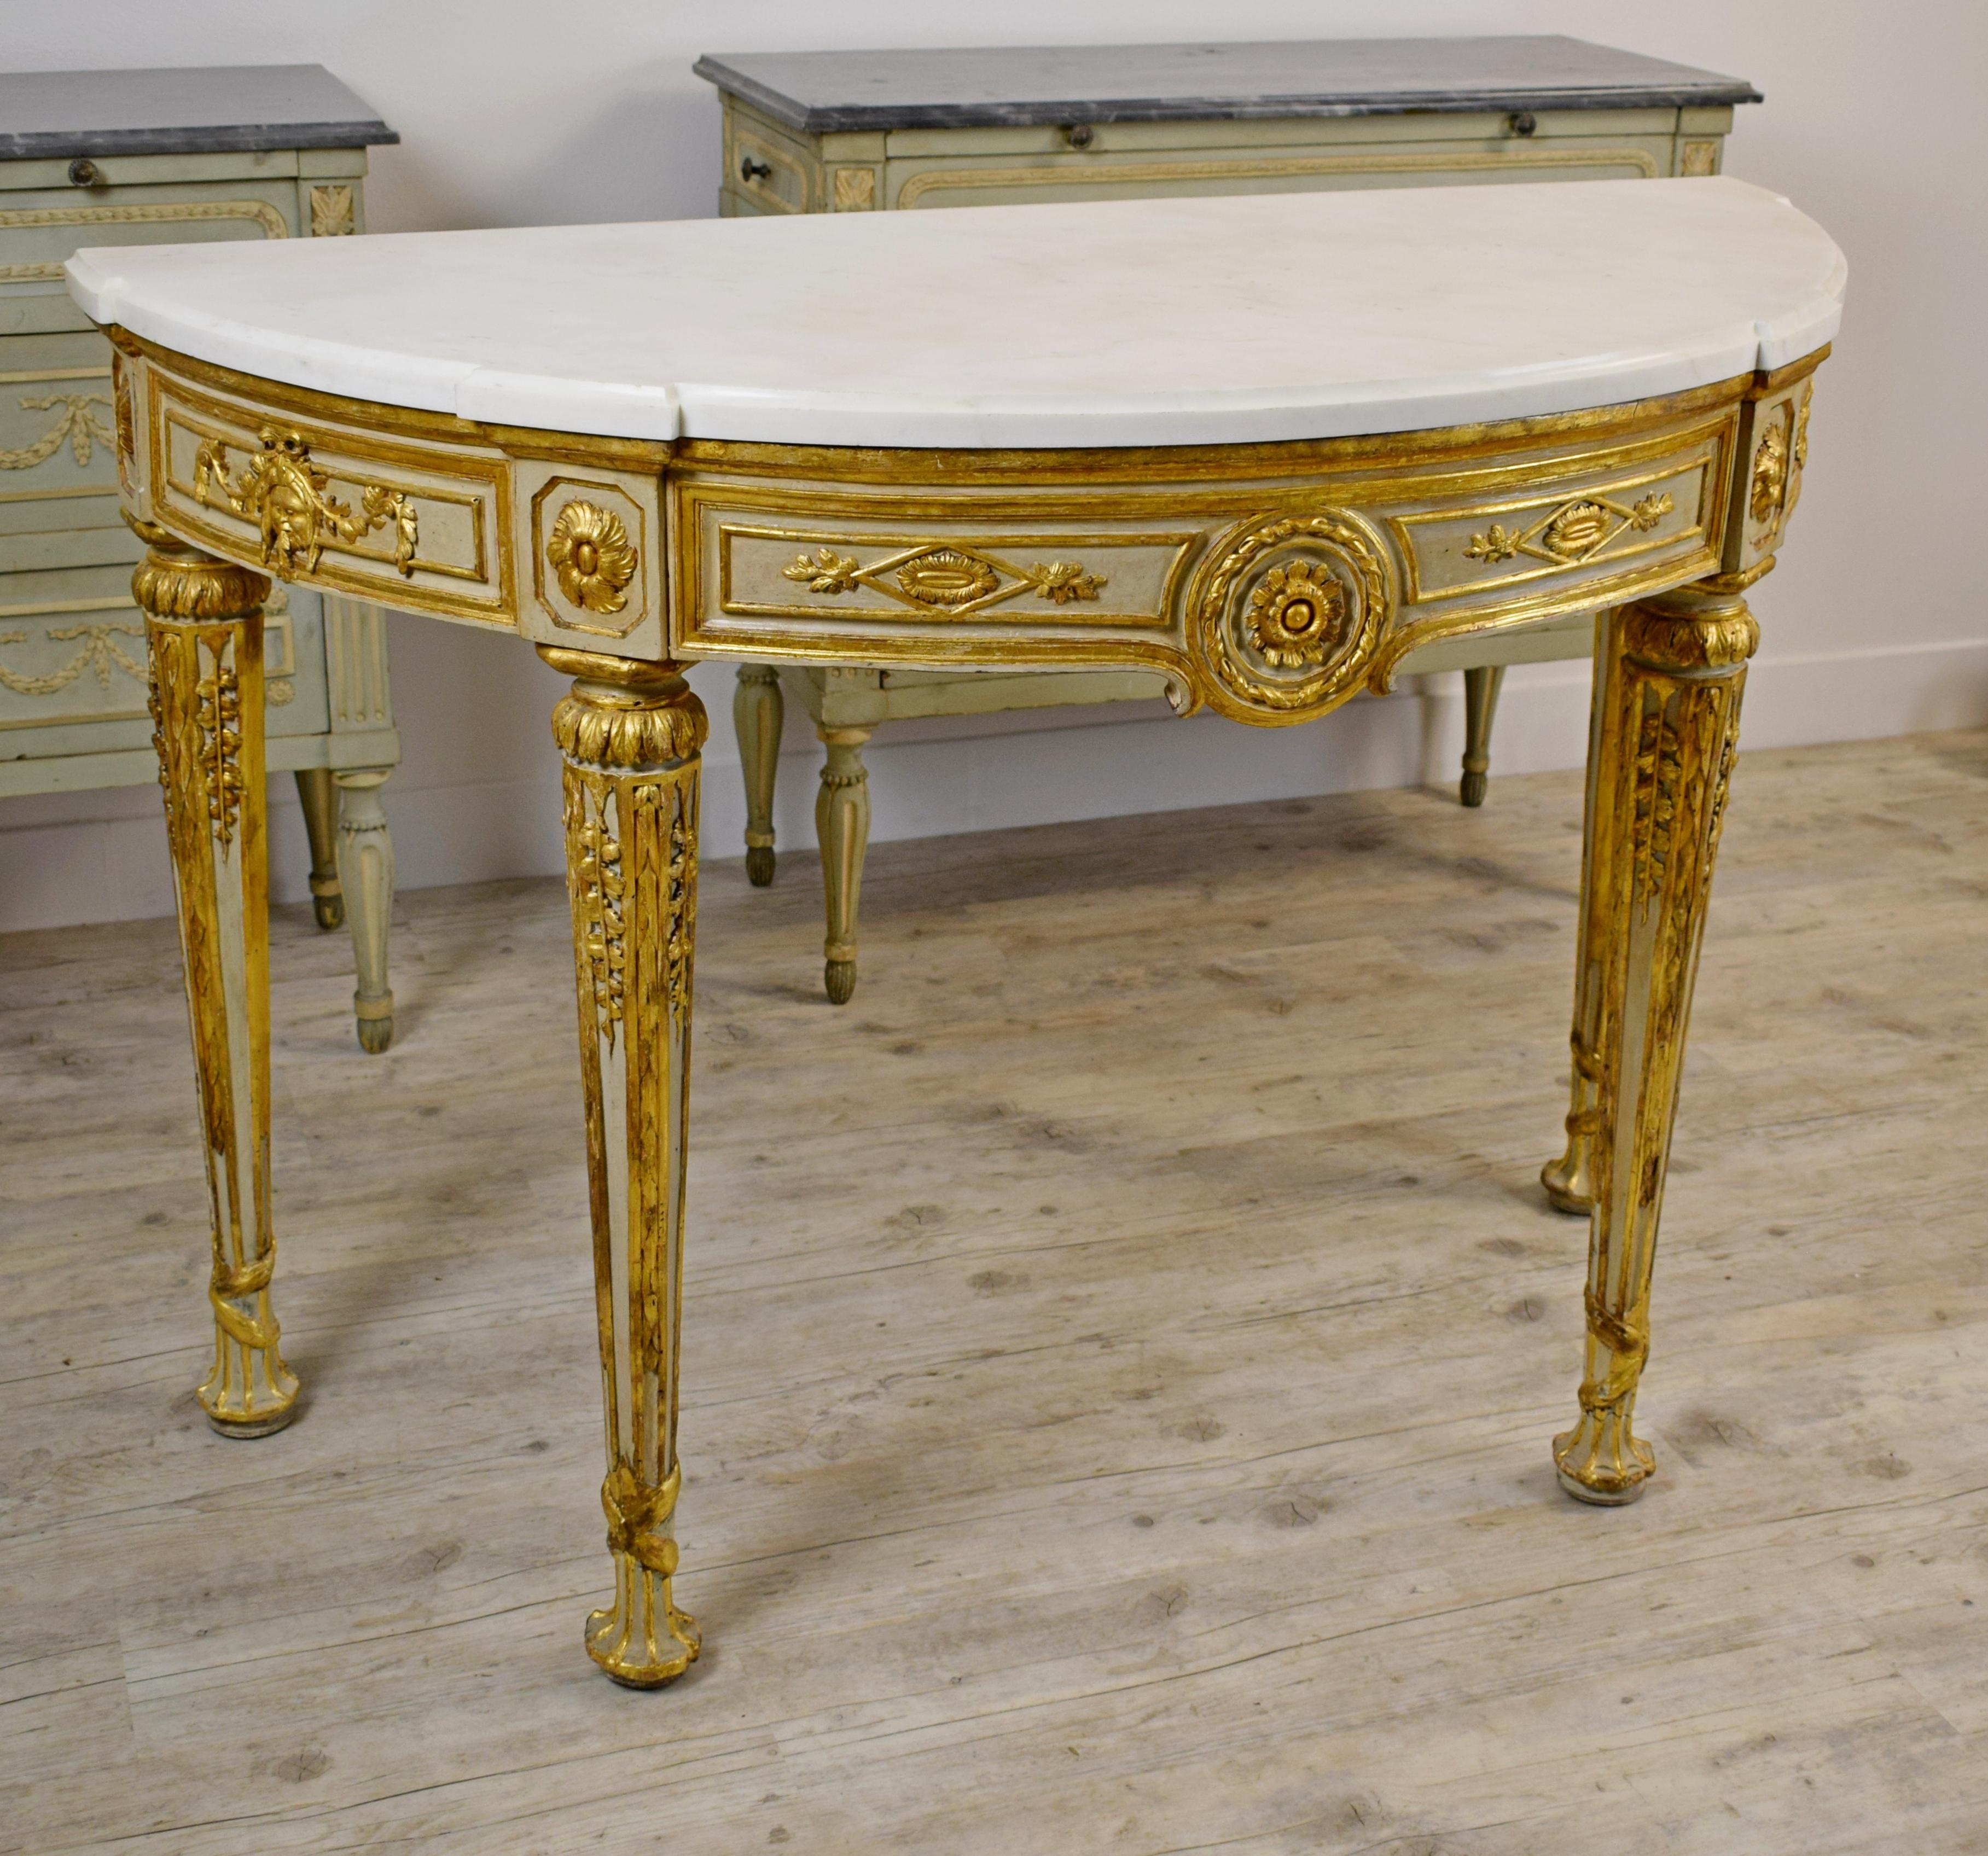 Italian neoclassical half-moon lacquered and giltwood console table with white marble top
Italy, Naples, 18th century

This elegant console table, in finely carved, lacquered and gilded wood, fully represents the taste that prevailed in Italy at